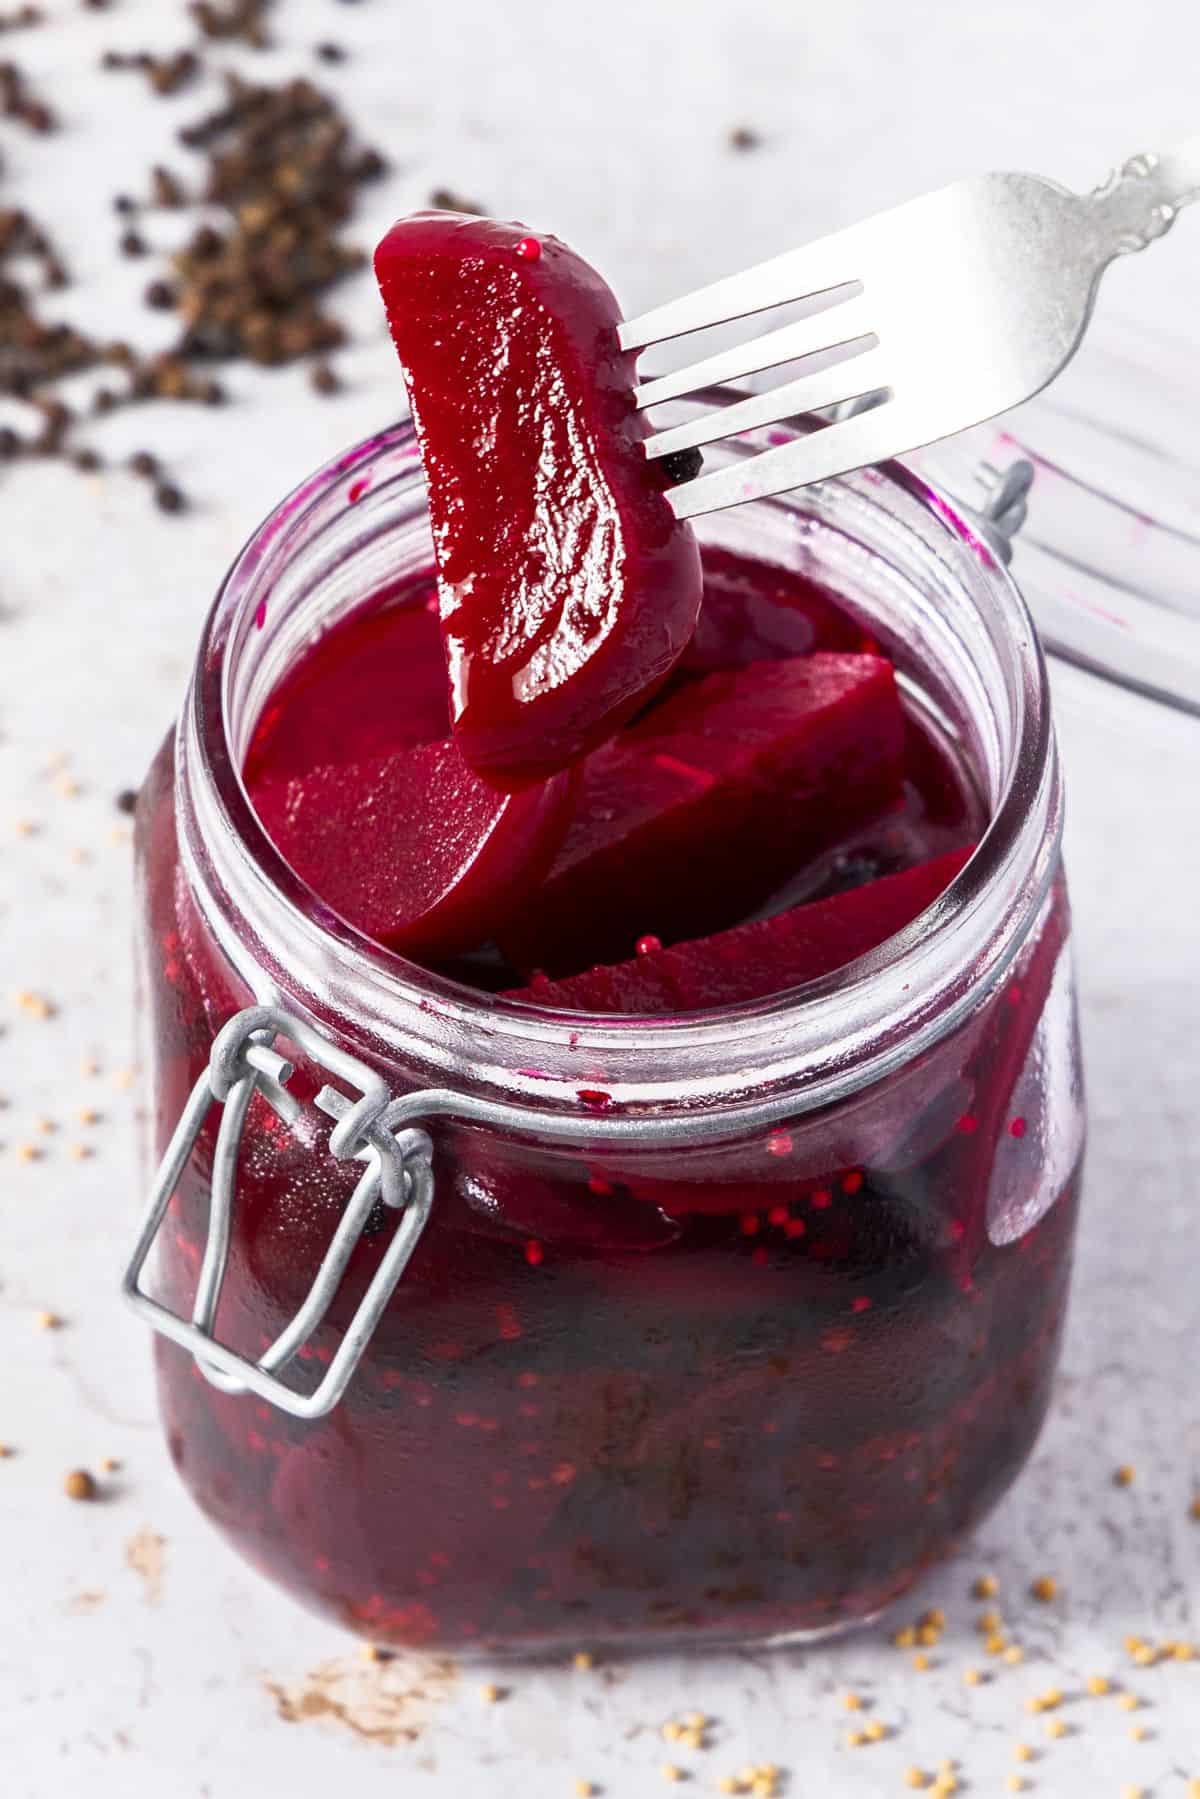 Glass jar of Pickled Beetroot, with a fork lifting a piece from the jar.